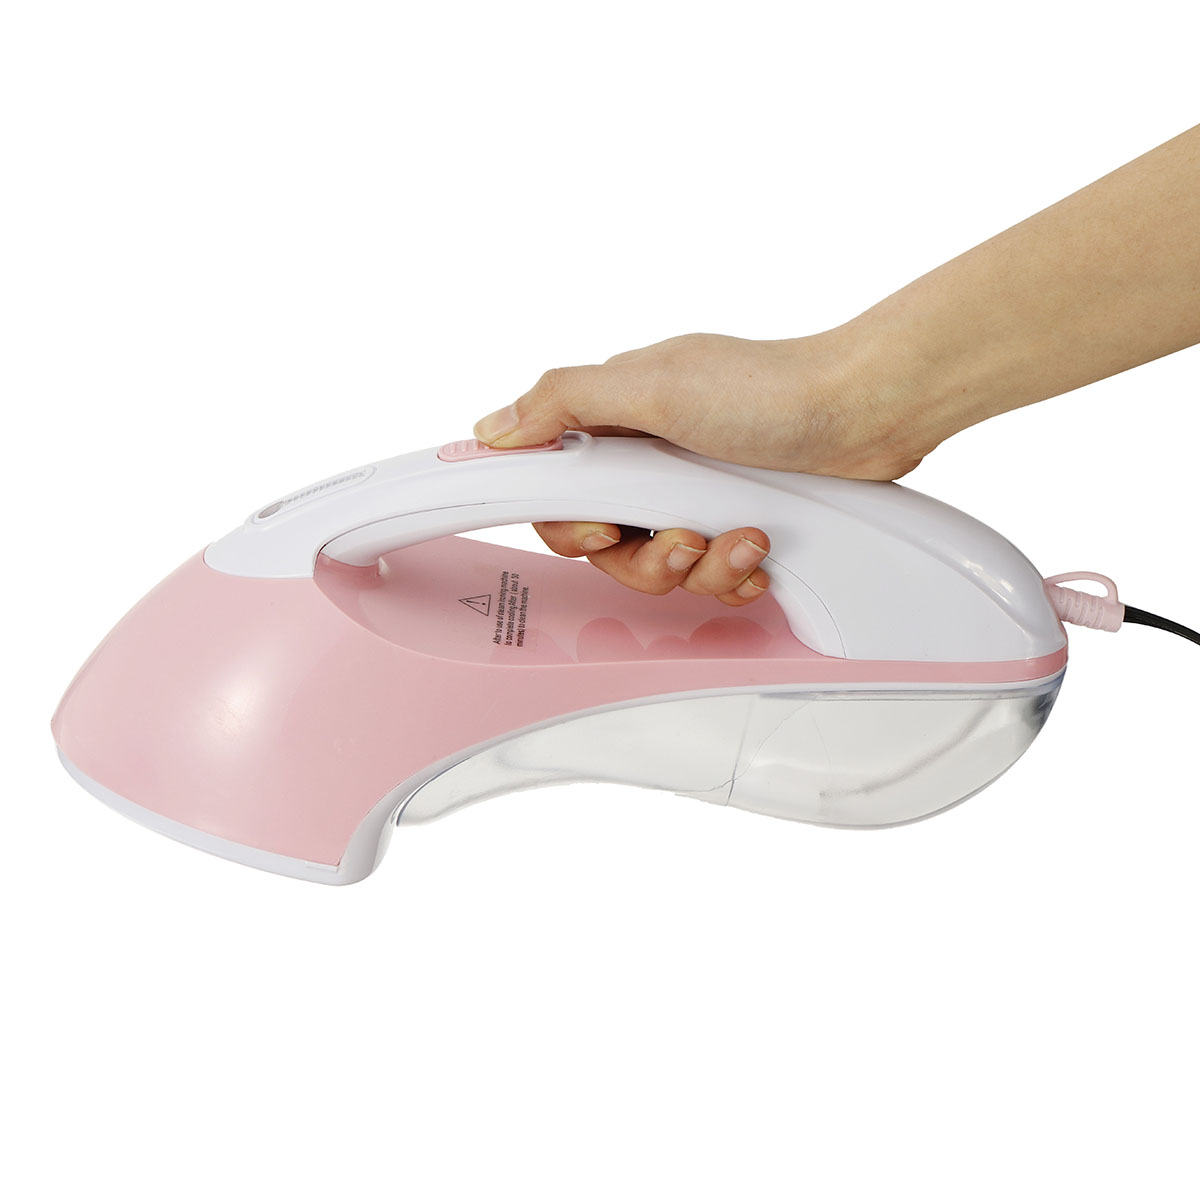 110V-1000W-Handheld-Electric-Steam-Iron-Fabric-Clothes-Garment-Steamer-Dry-Flat-1500430-8